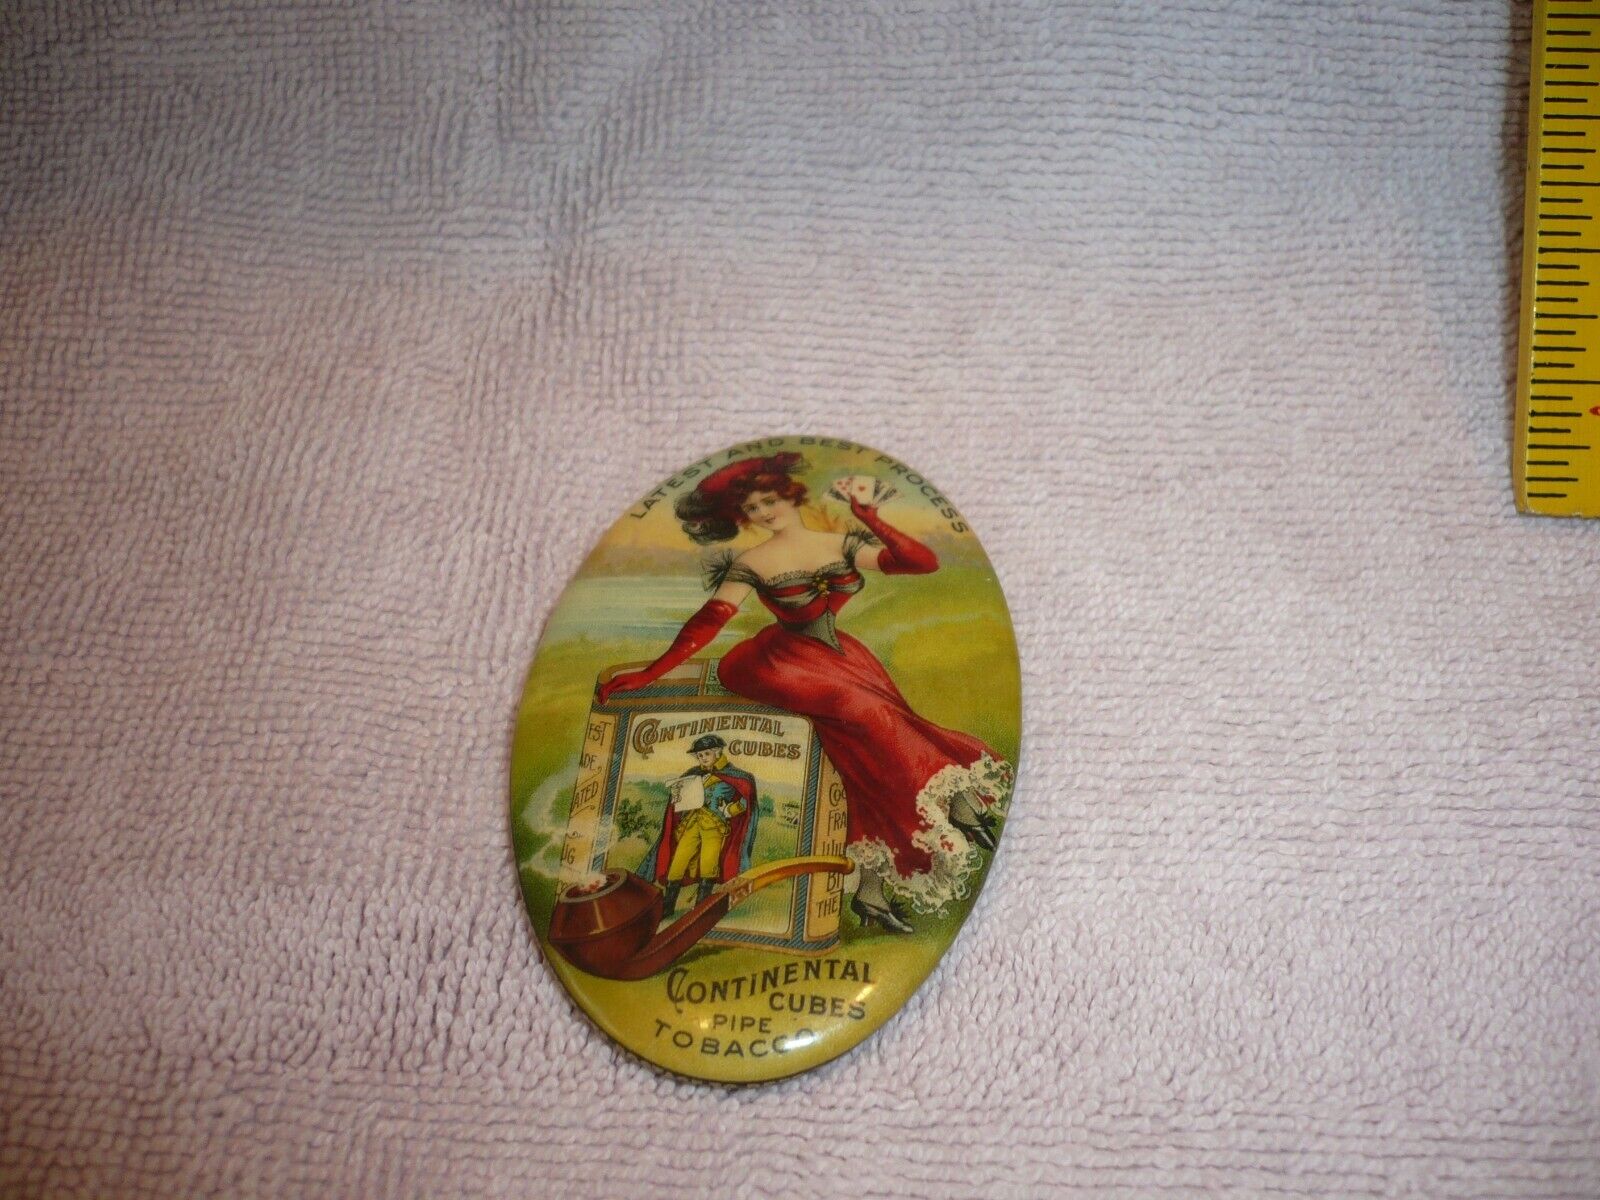 CONTINENTAL CUBES TOBACCO POCKET MIRROR - EARLY 1900’s -  clean cond. 